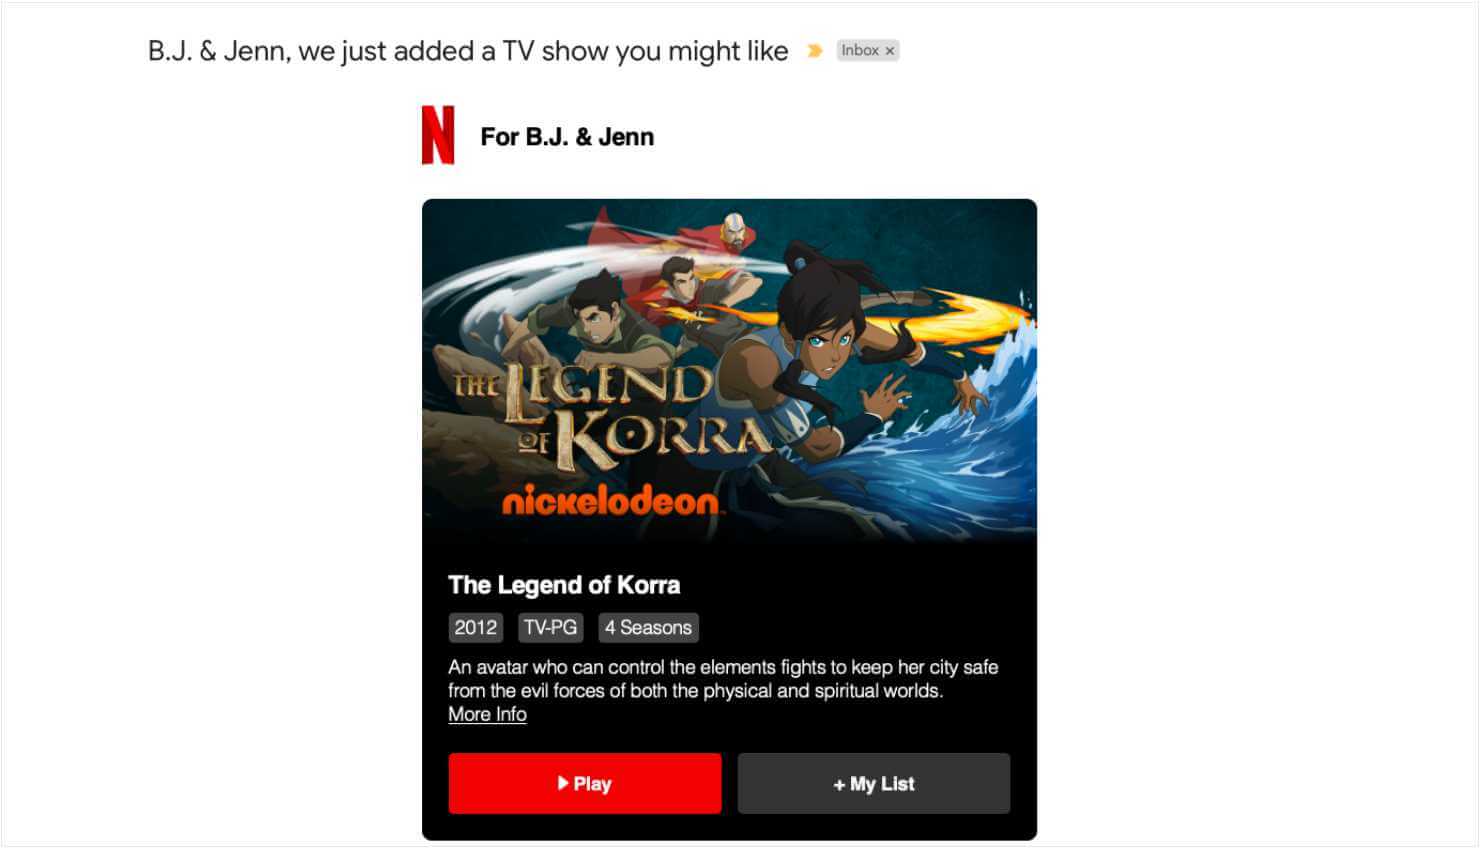 Email from Netflix with the subject line "B.J. & Jenn, we just added a TV show you might like." The email recommends the show The Legend of Korra and has 2 CTA buttons: "Play" and "+ My List"